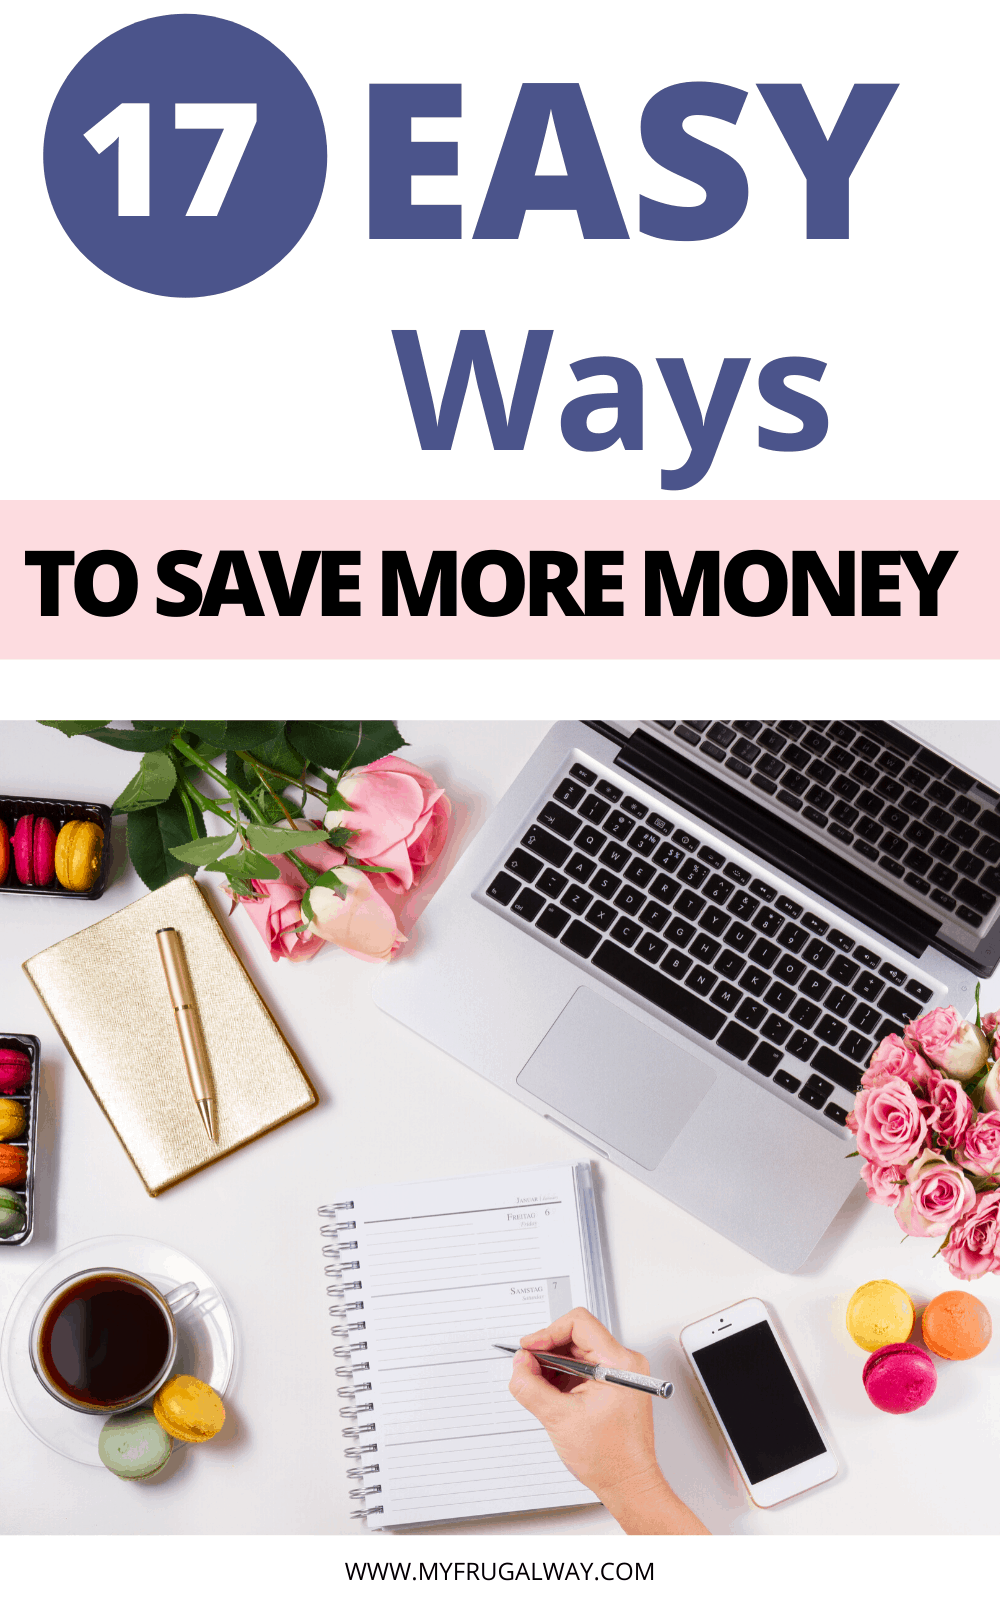 Are you struggling financially and looking for easy money saving tips to help you save more money while living paycheck to paycheck. Learn how to save money on a low income with these 17 genius tips. #finances #frugalliving #money #savemoney